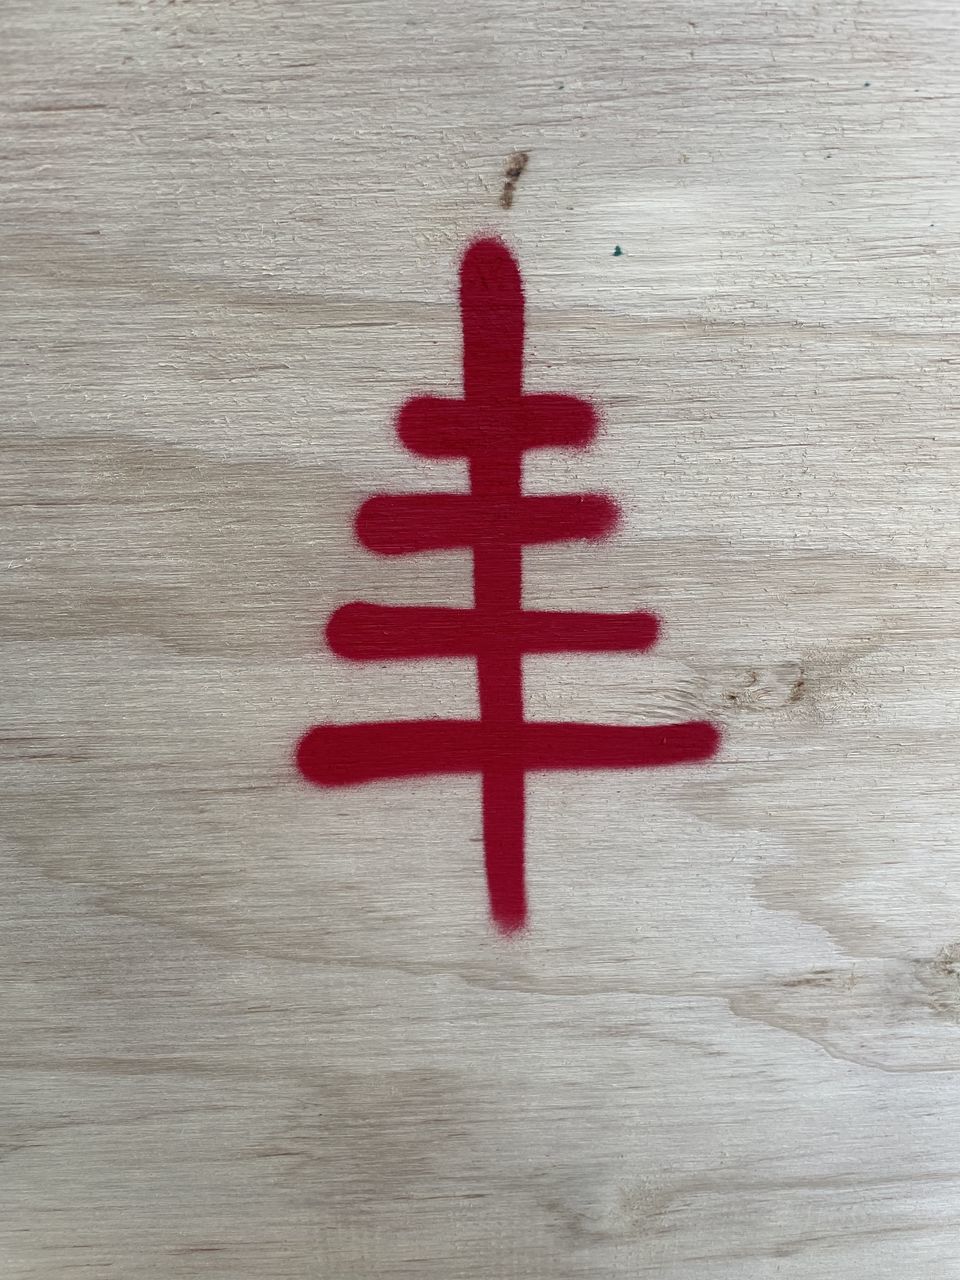 wood, red, cross, symbol, no people, close-up, indoors, cross shape, textured, white